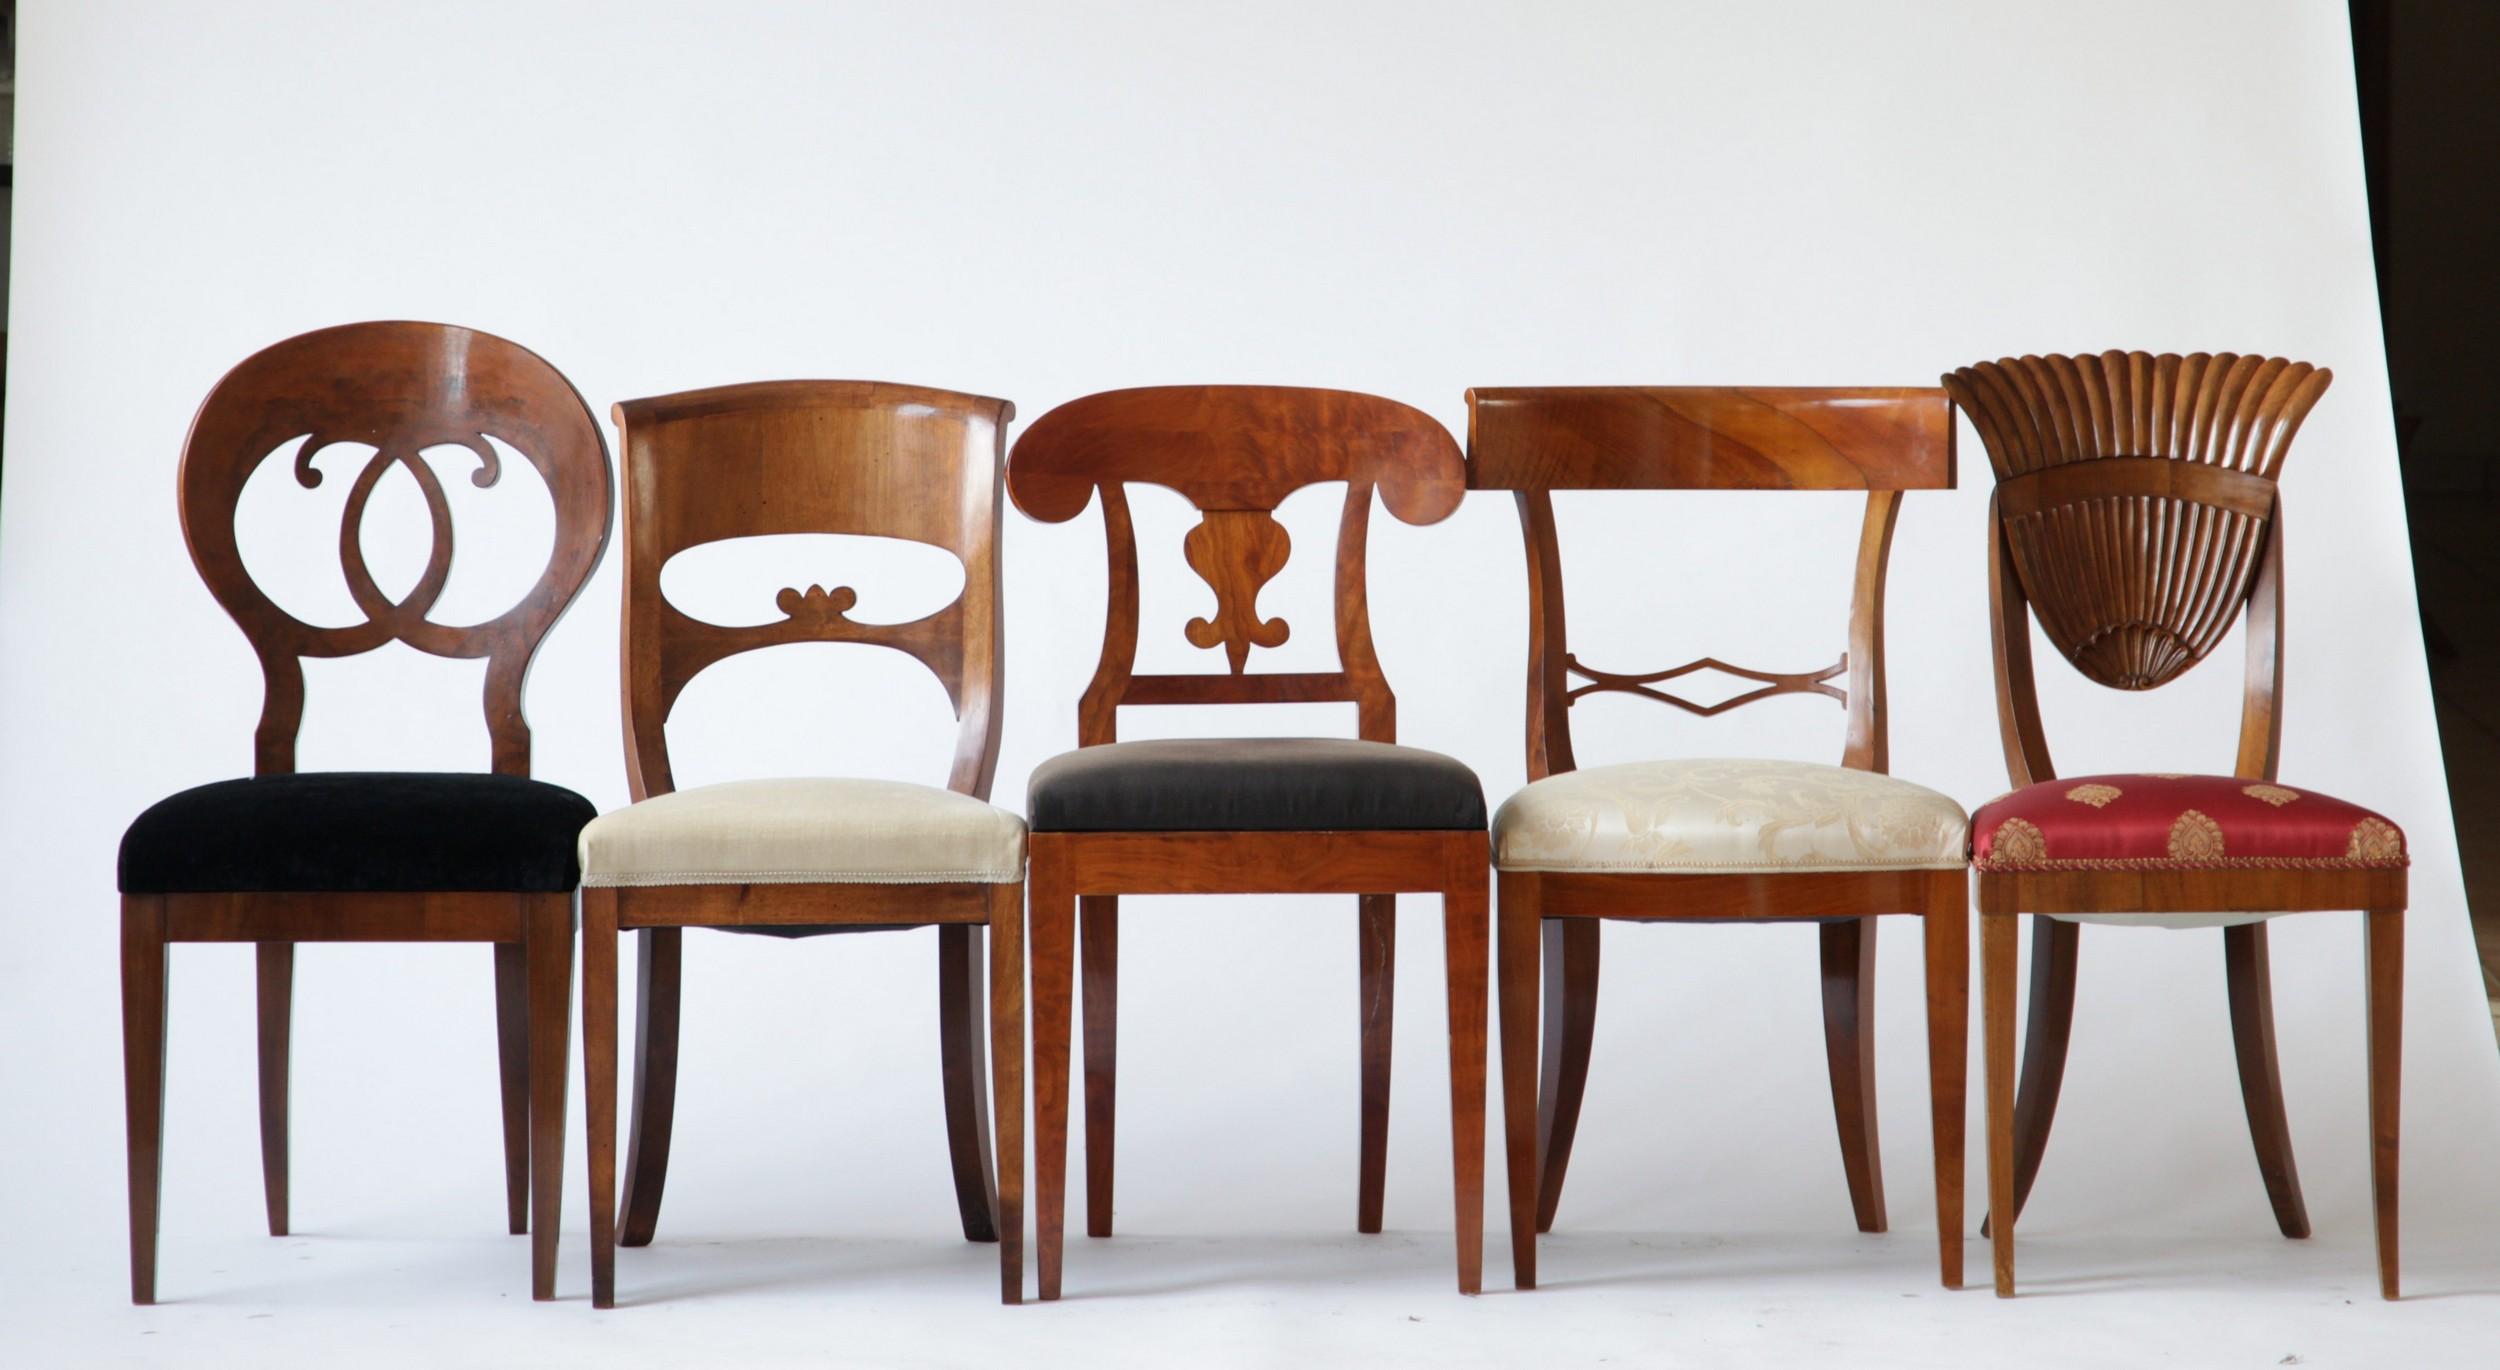 I'm proposing here the last (in order of posting) Biedermeier set. Made of ten different style of chairs. 
I have such a mixed emotion on this project. In one way I feel the regret of breaking in smaller lots one of the widest collections of XIX